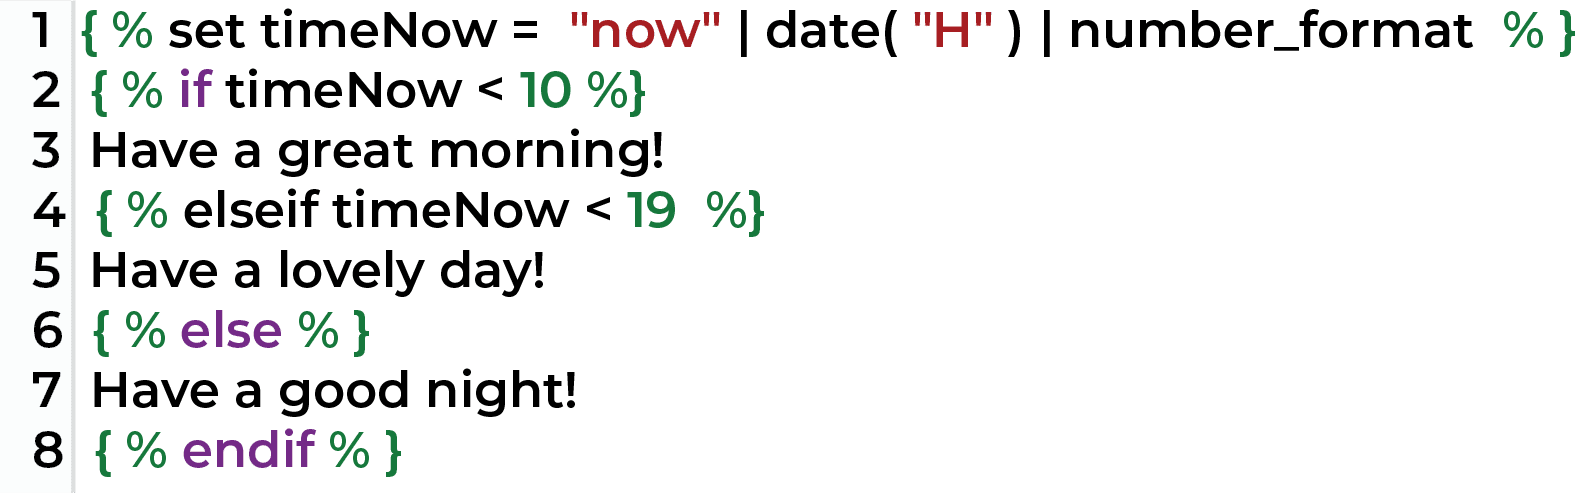 Example of the coding language used to build dynamic content